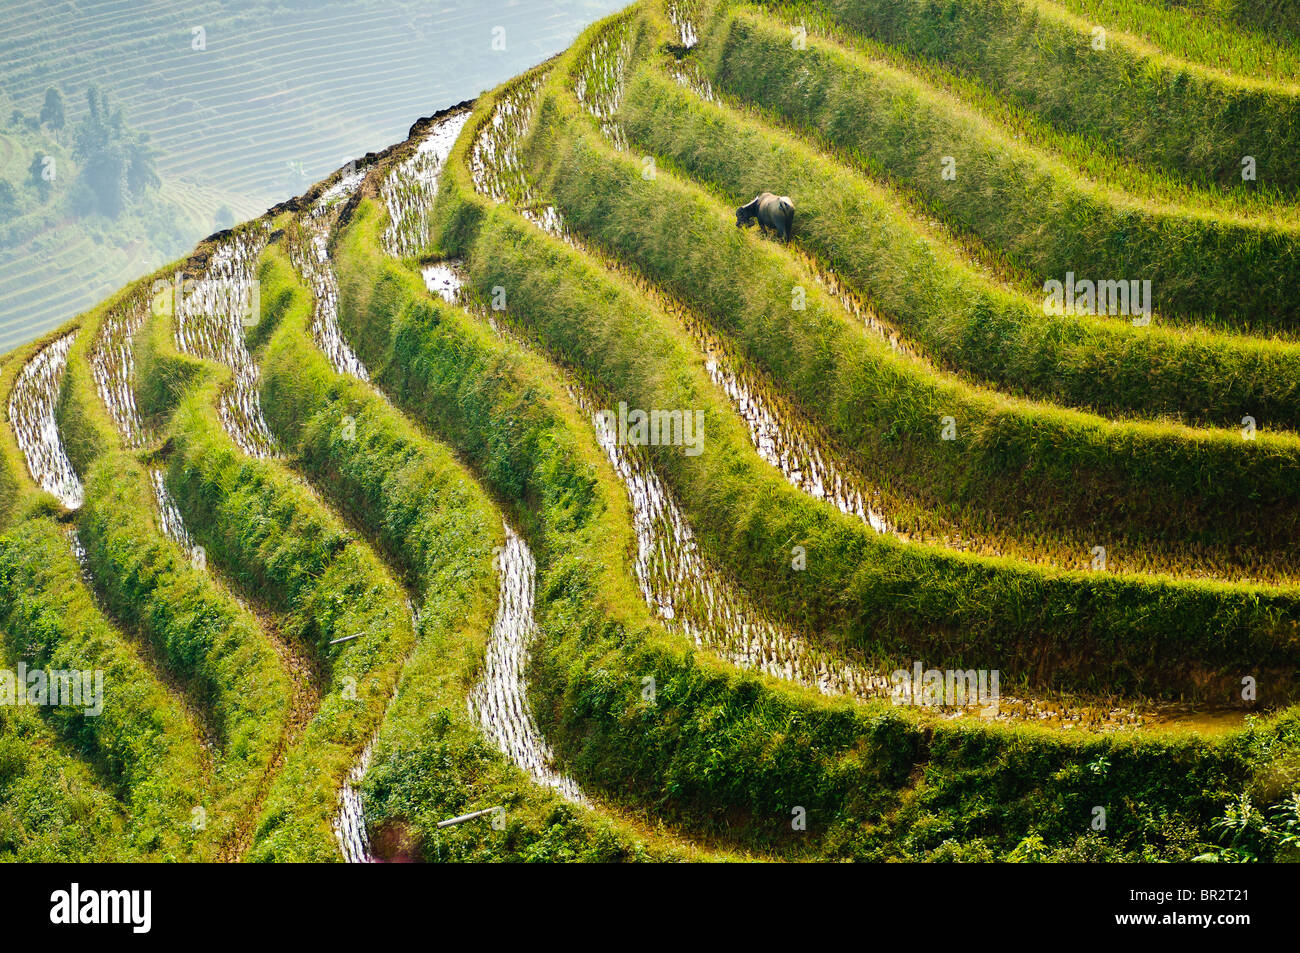 A beautiful view of the rice fields in Sapa, Vietnam Stock Photo